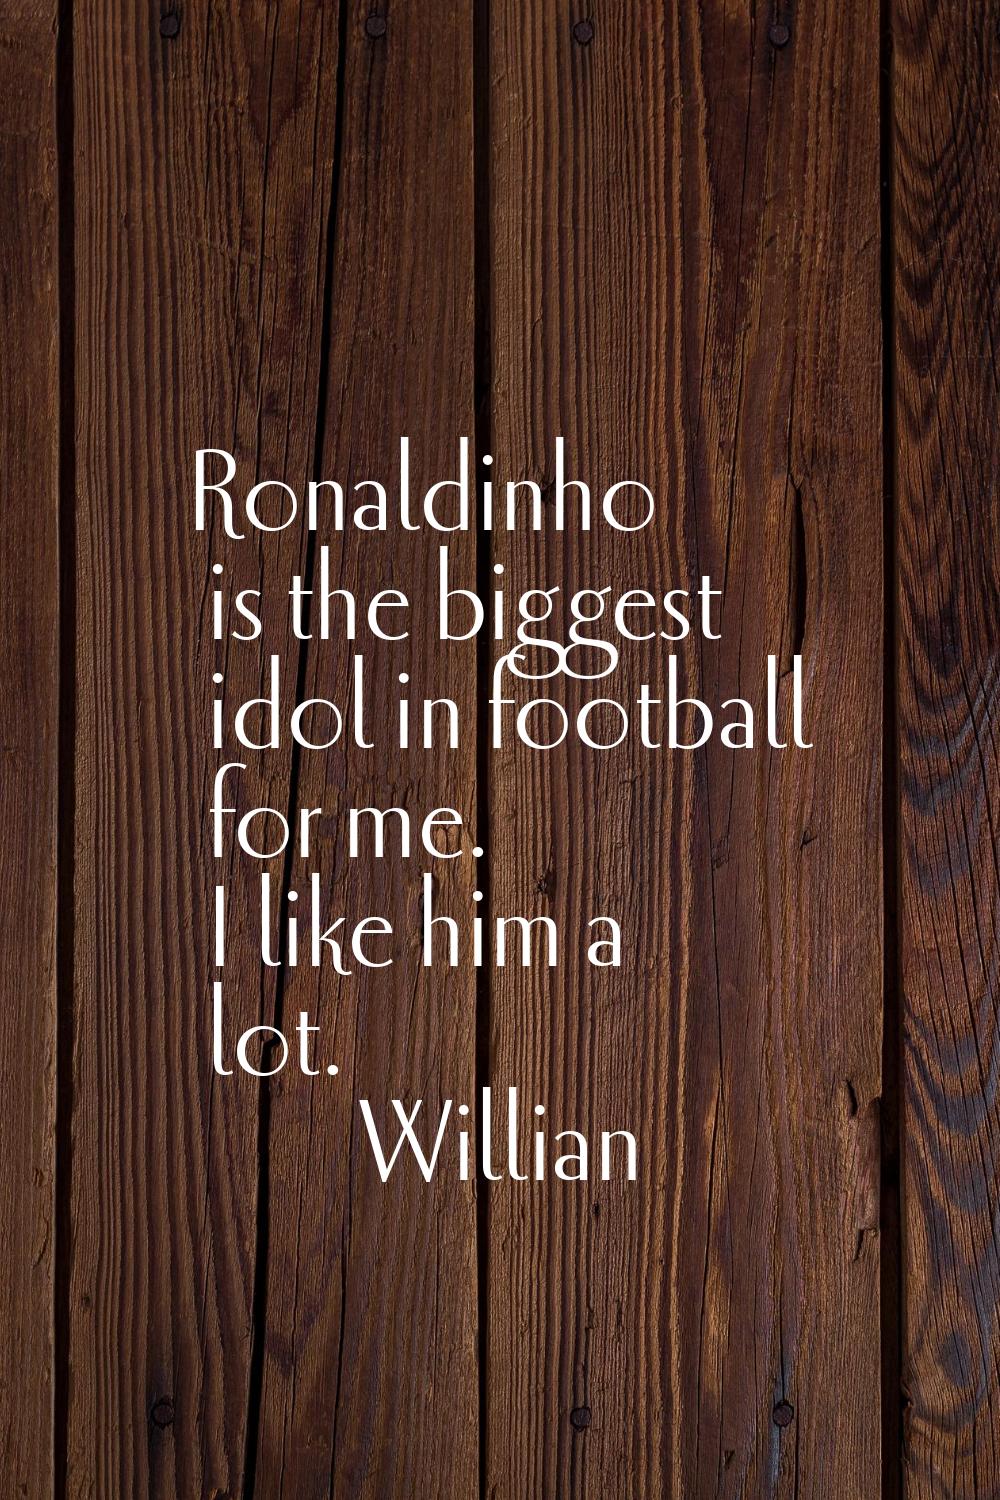 Ronaldinho is the biggest idol in football for me. I like him a lot.